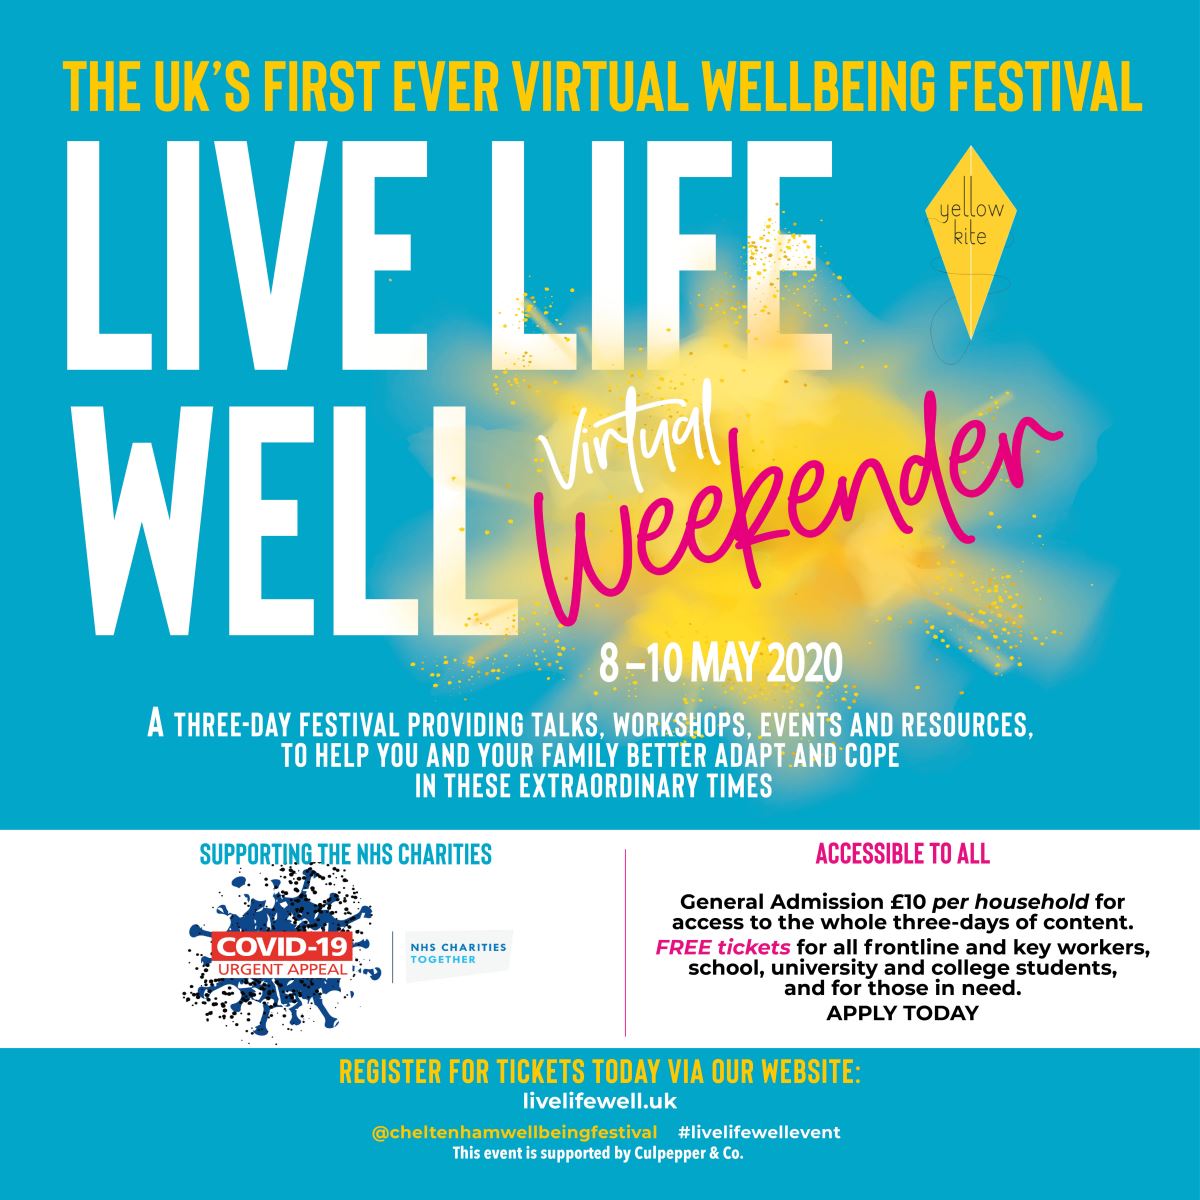 Join the UK's First Virtual Wellbeing Festival